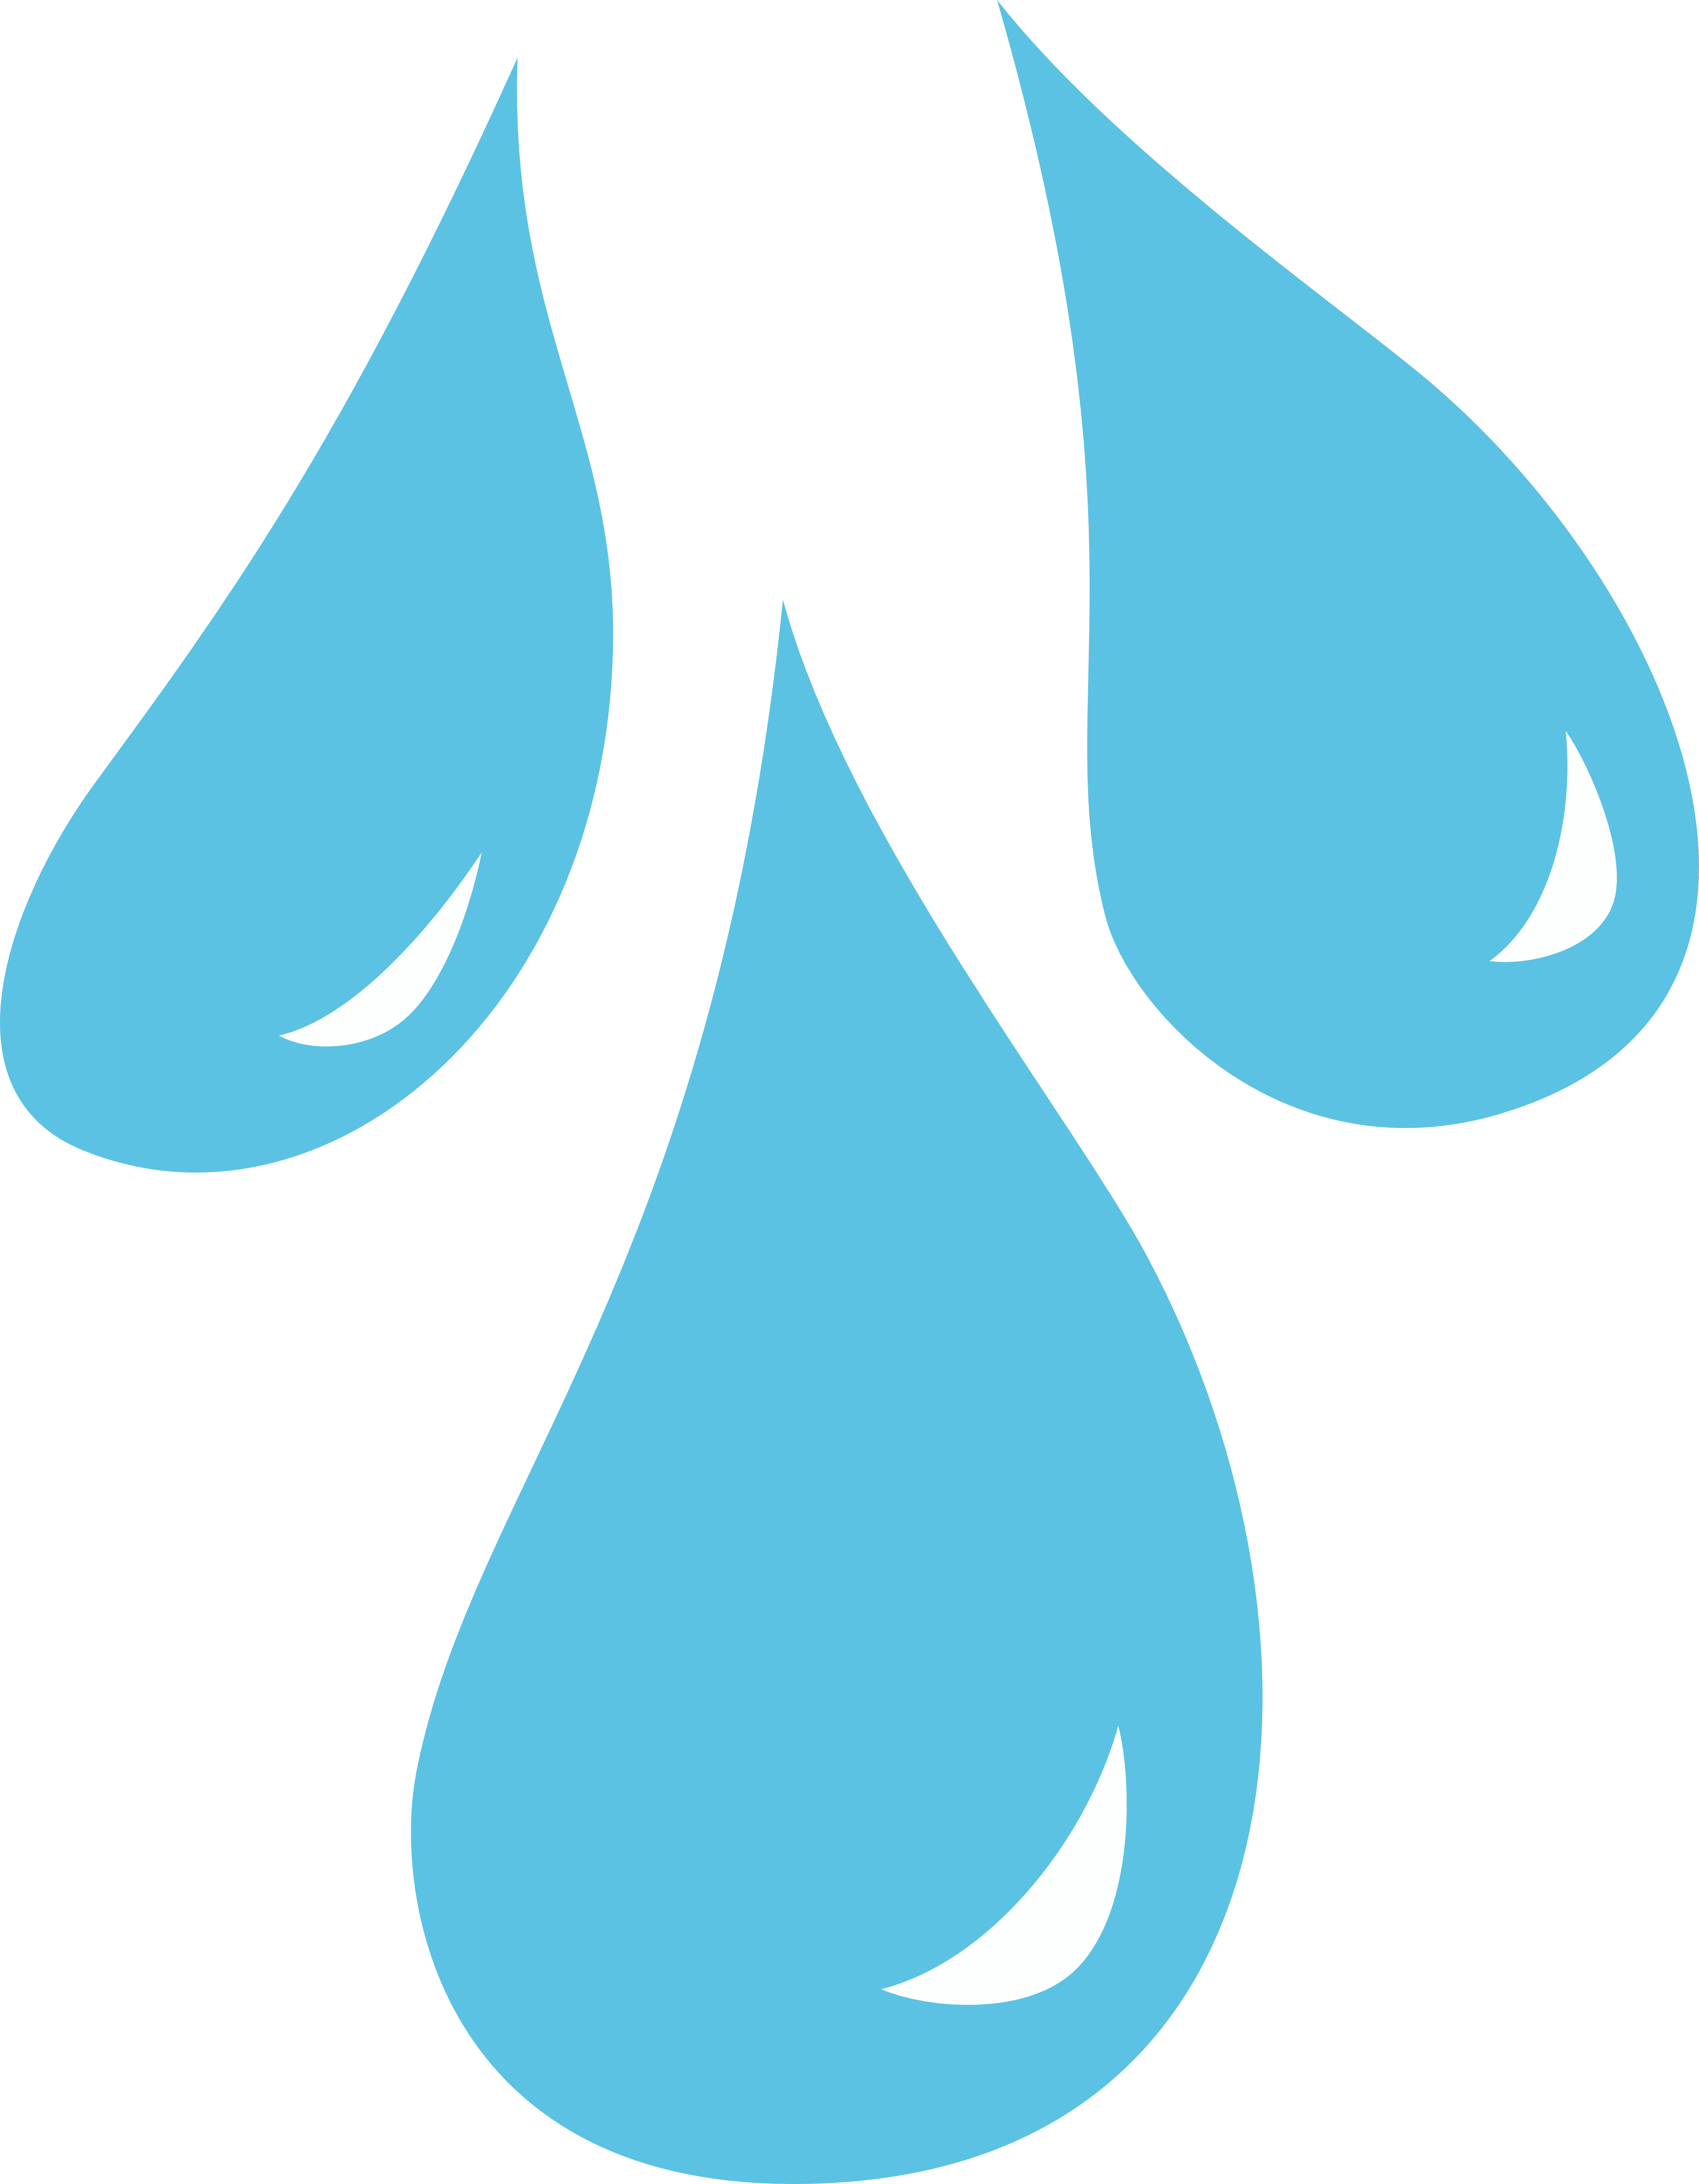 Template Of Raindrop With Lines - ClipArt Best